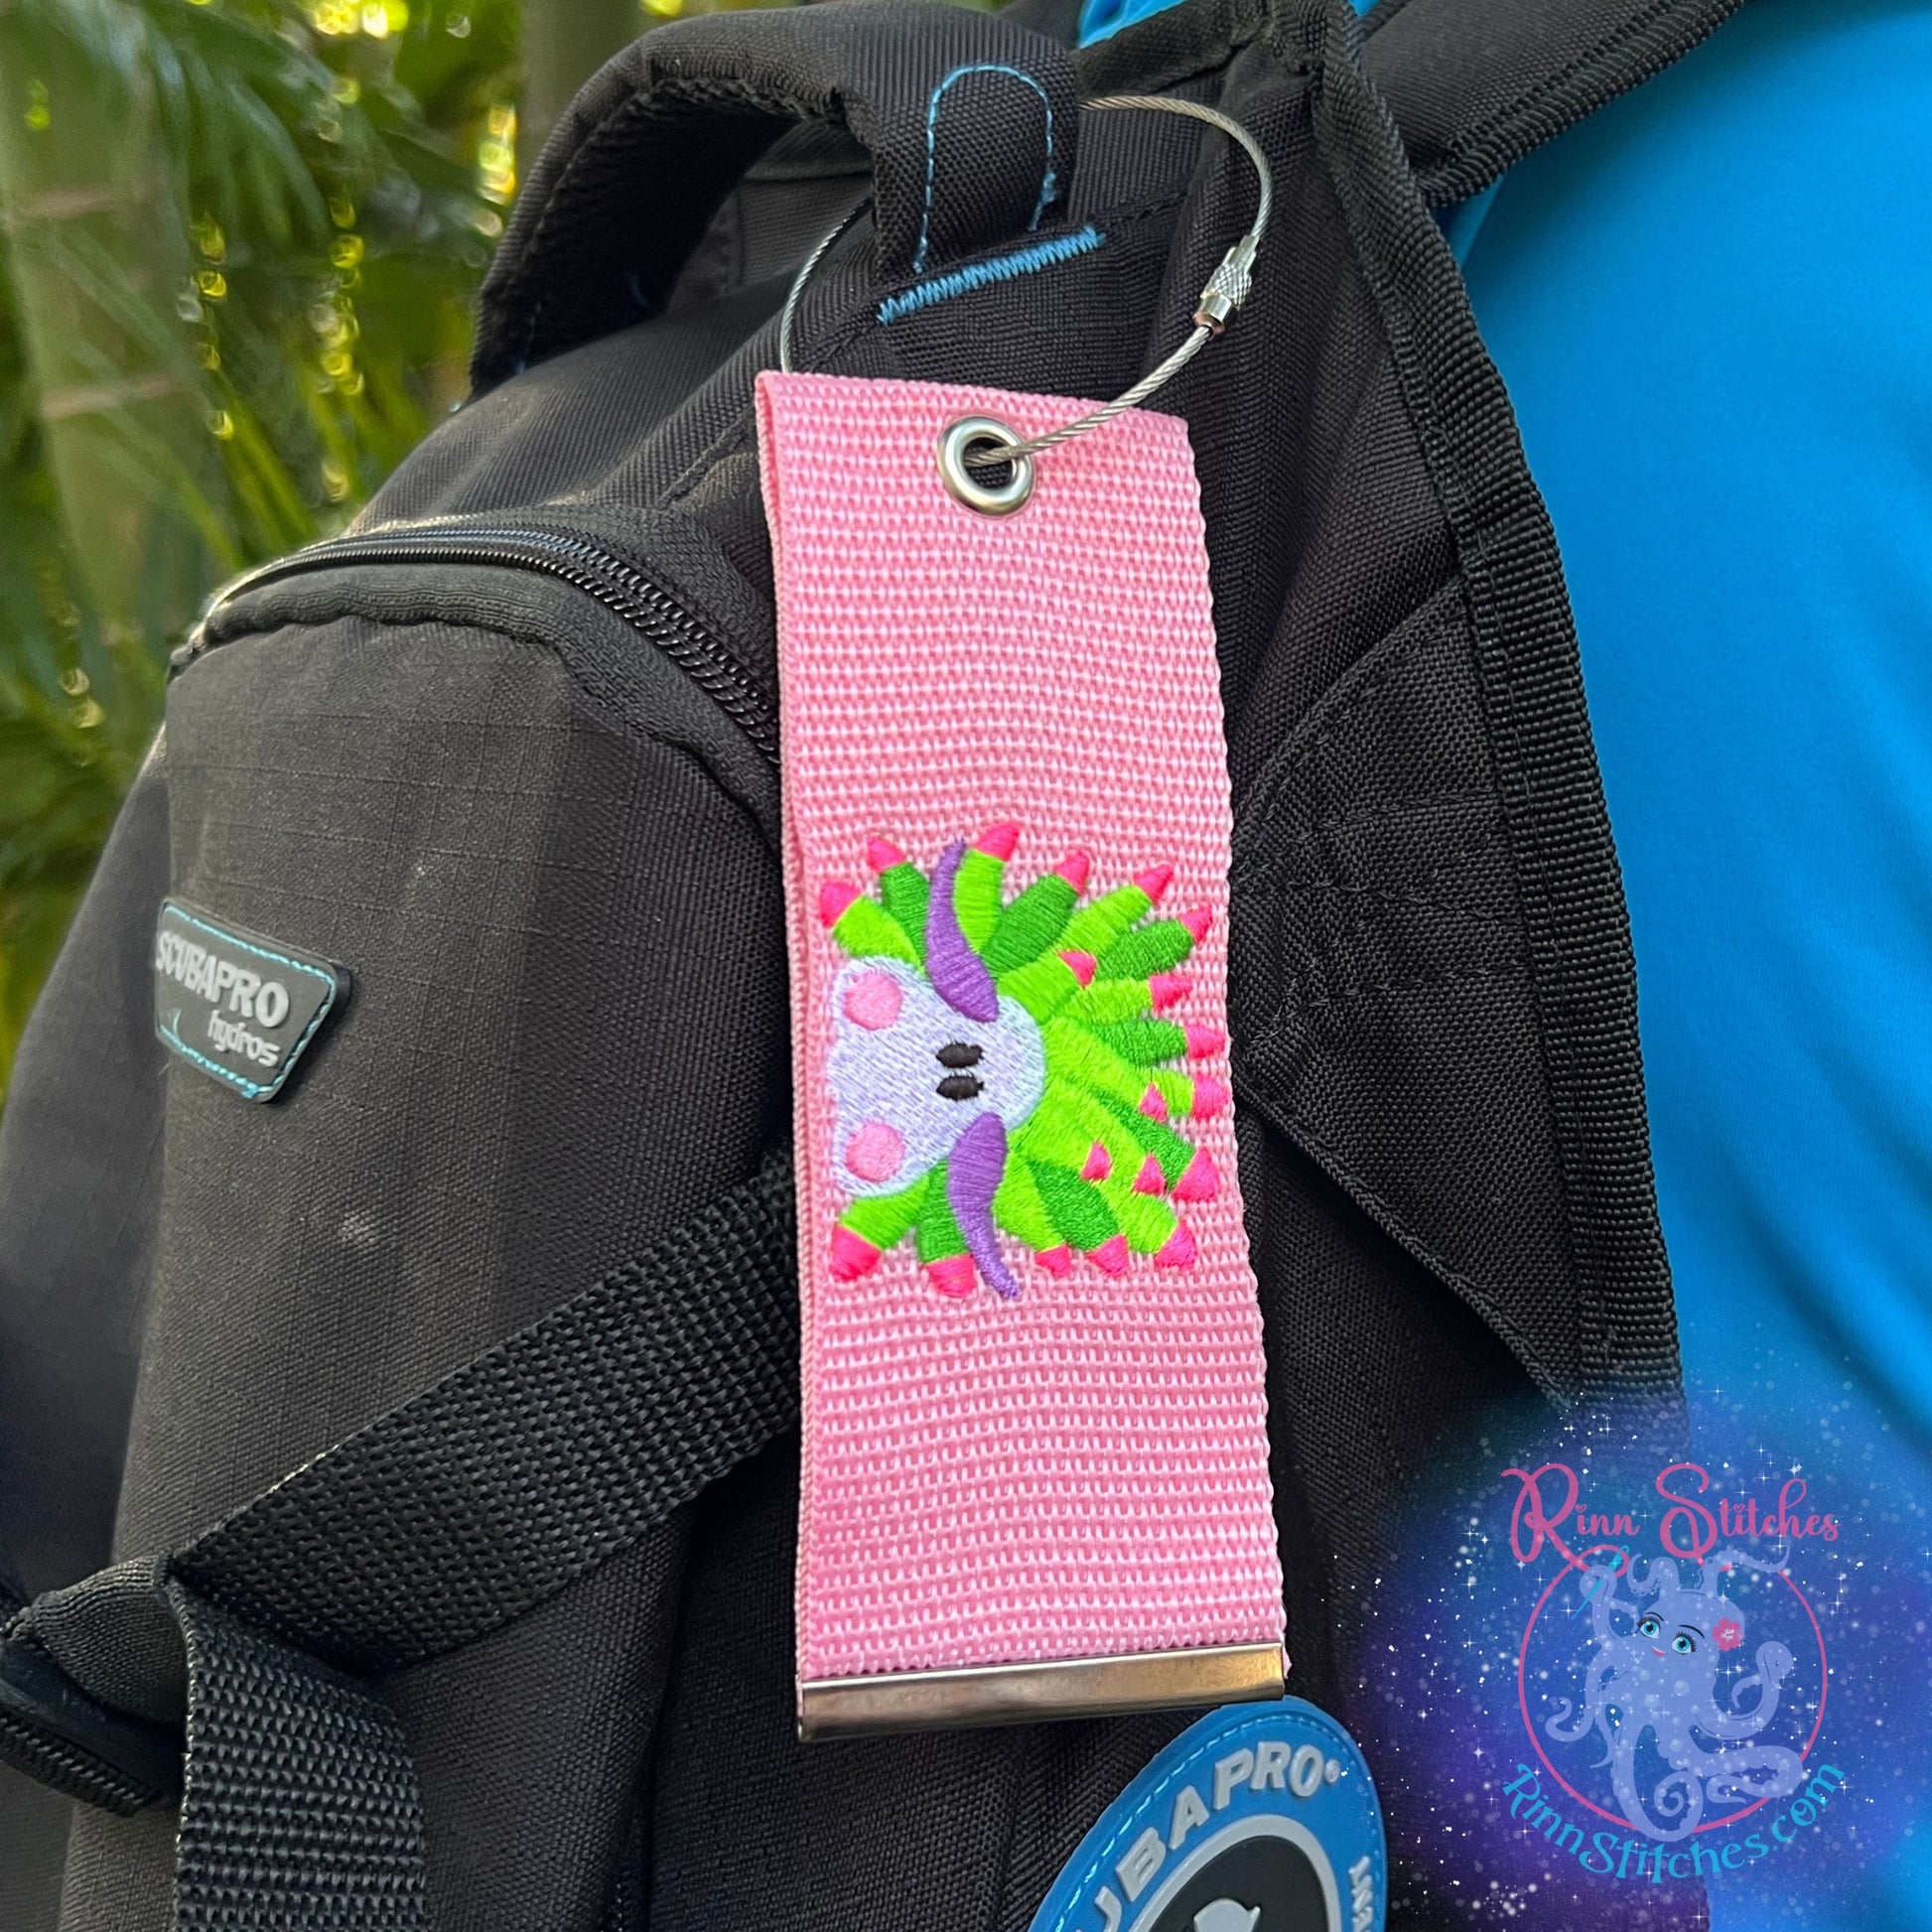 Sheep Nudibranch Luggage Tag, Personalized Embroidered Bag Tag for all your Travel needs by Rinn Stitches in Maui, Hawaii